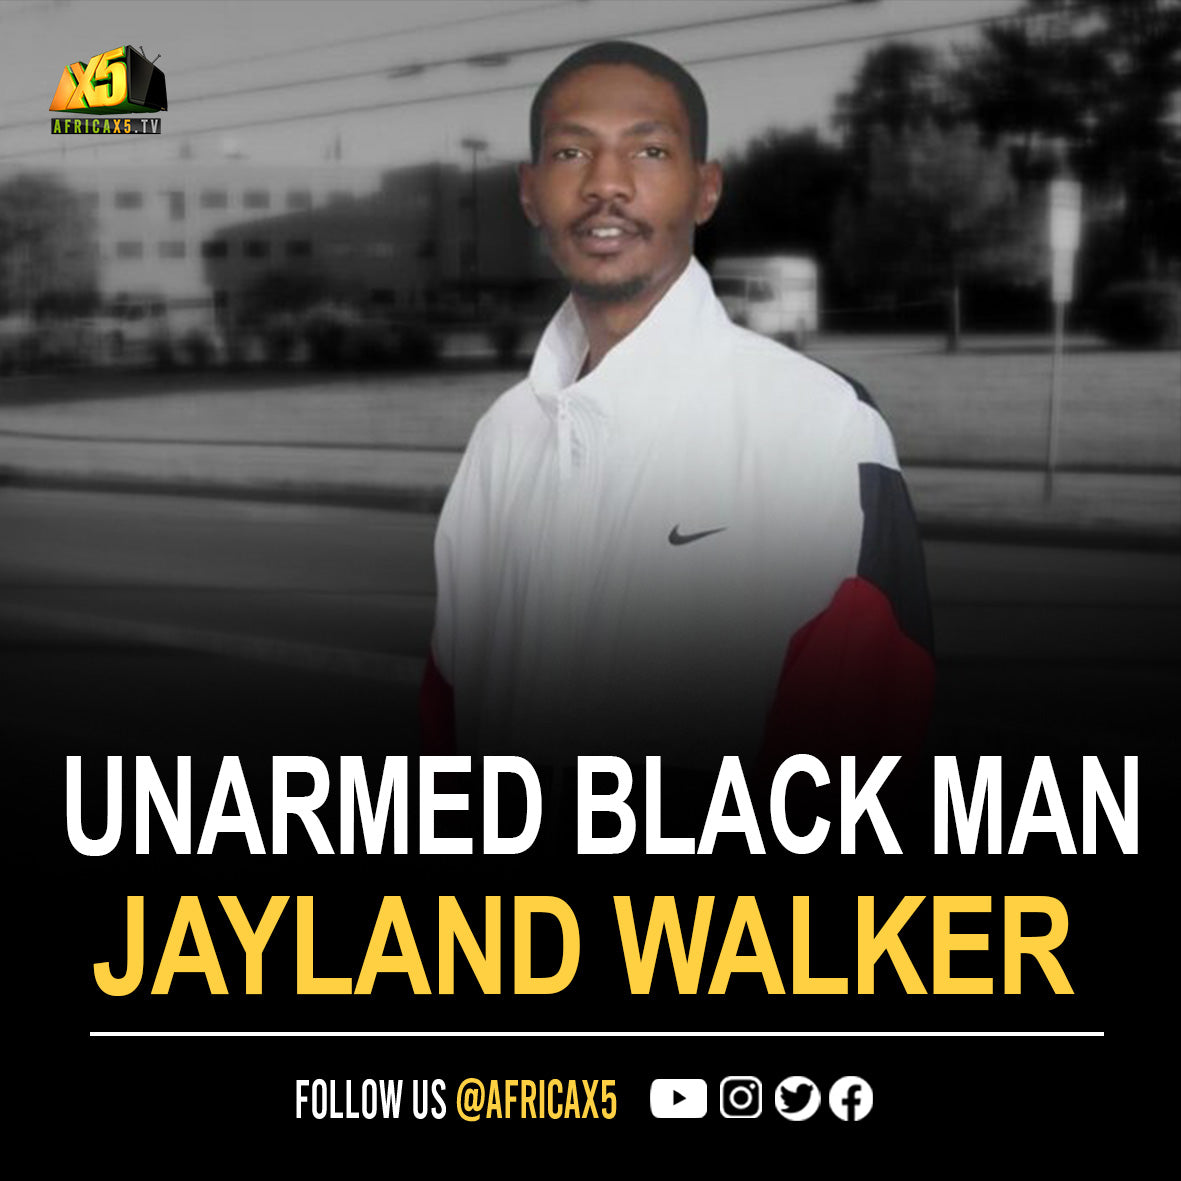 Fatal shooting of Unarmed Black Man. Jayland Walker suffered at least 60 wounds in fatal police shooting, Authorities release bodycam footage